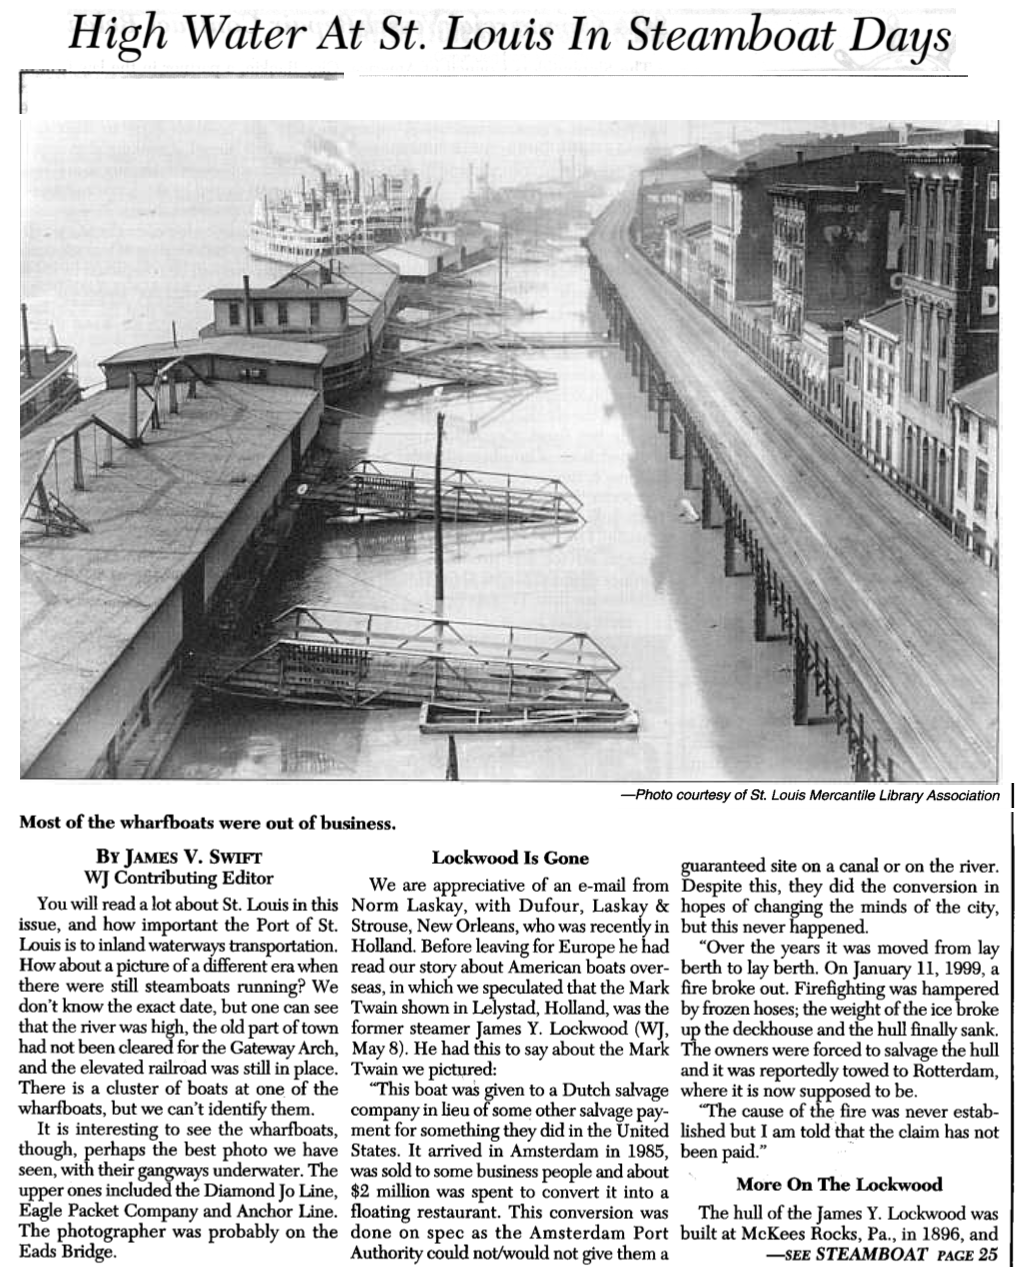 Iness. Steamboat (CONTINUED from PAGE 26) the Boat Was Completed at Marietta